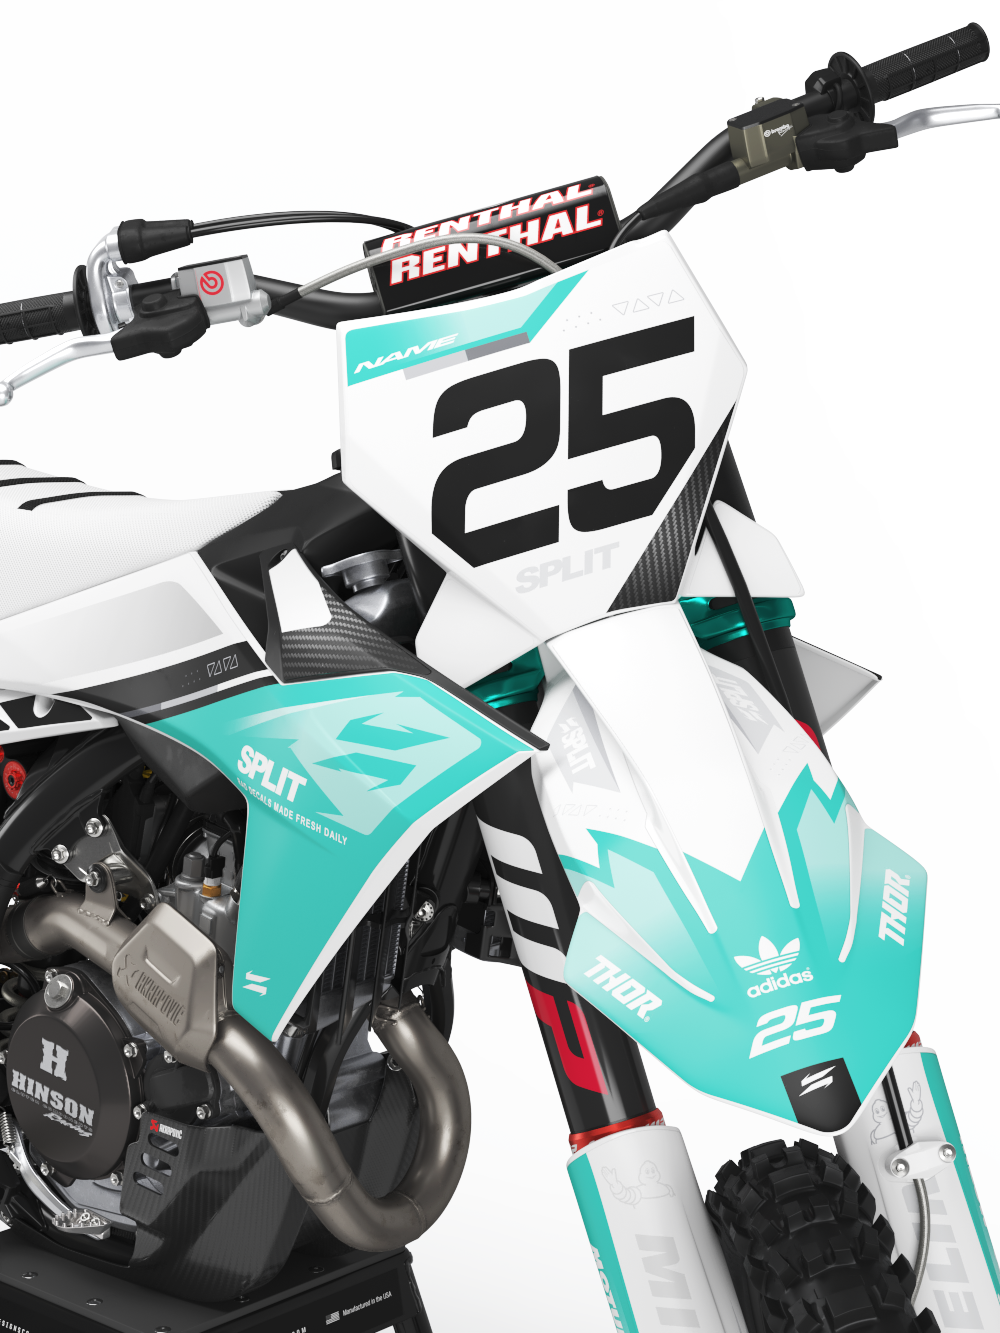 PULSE AIR TEAL Graphics Kit for KTM's – Designs Co